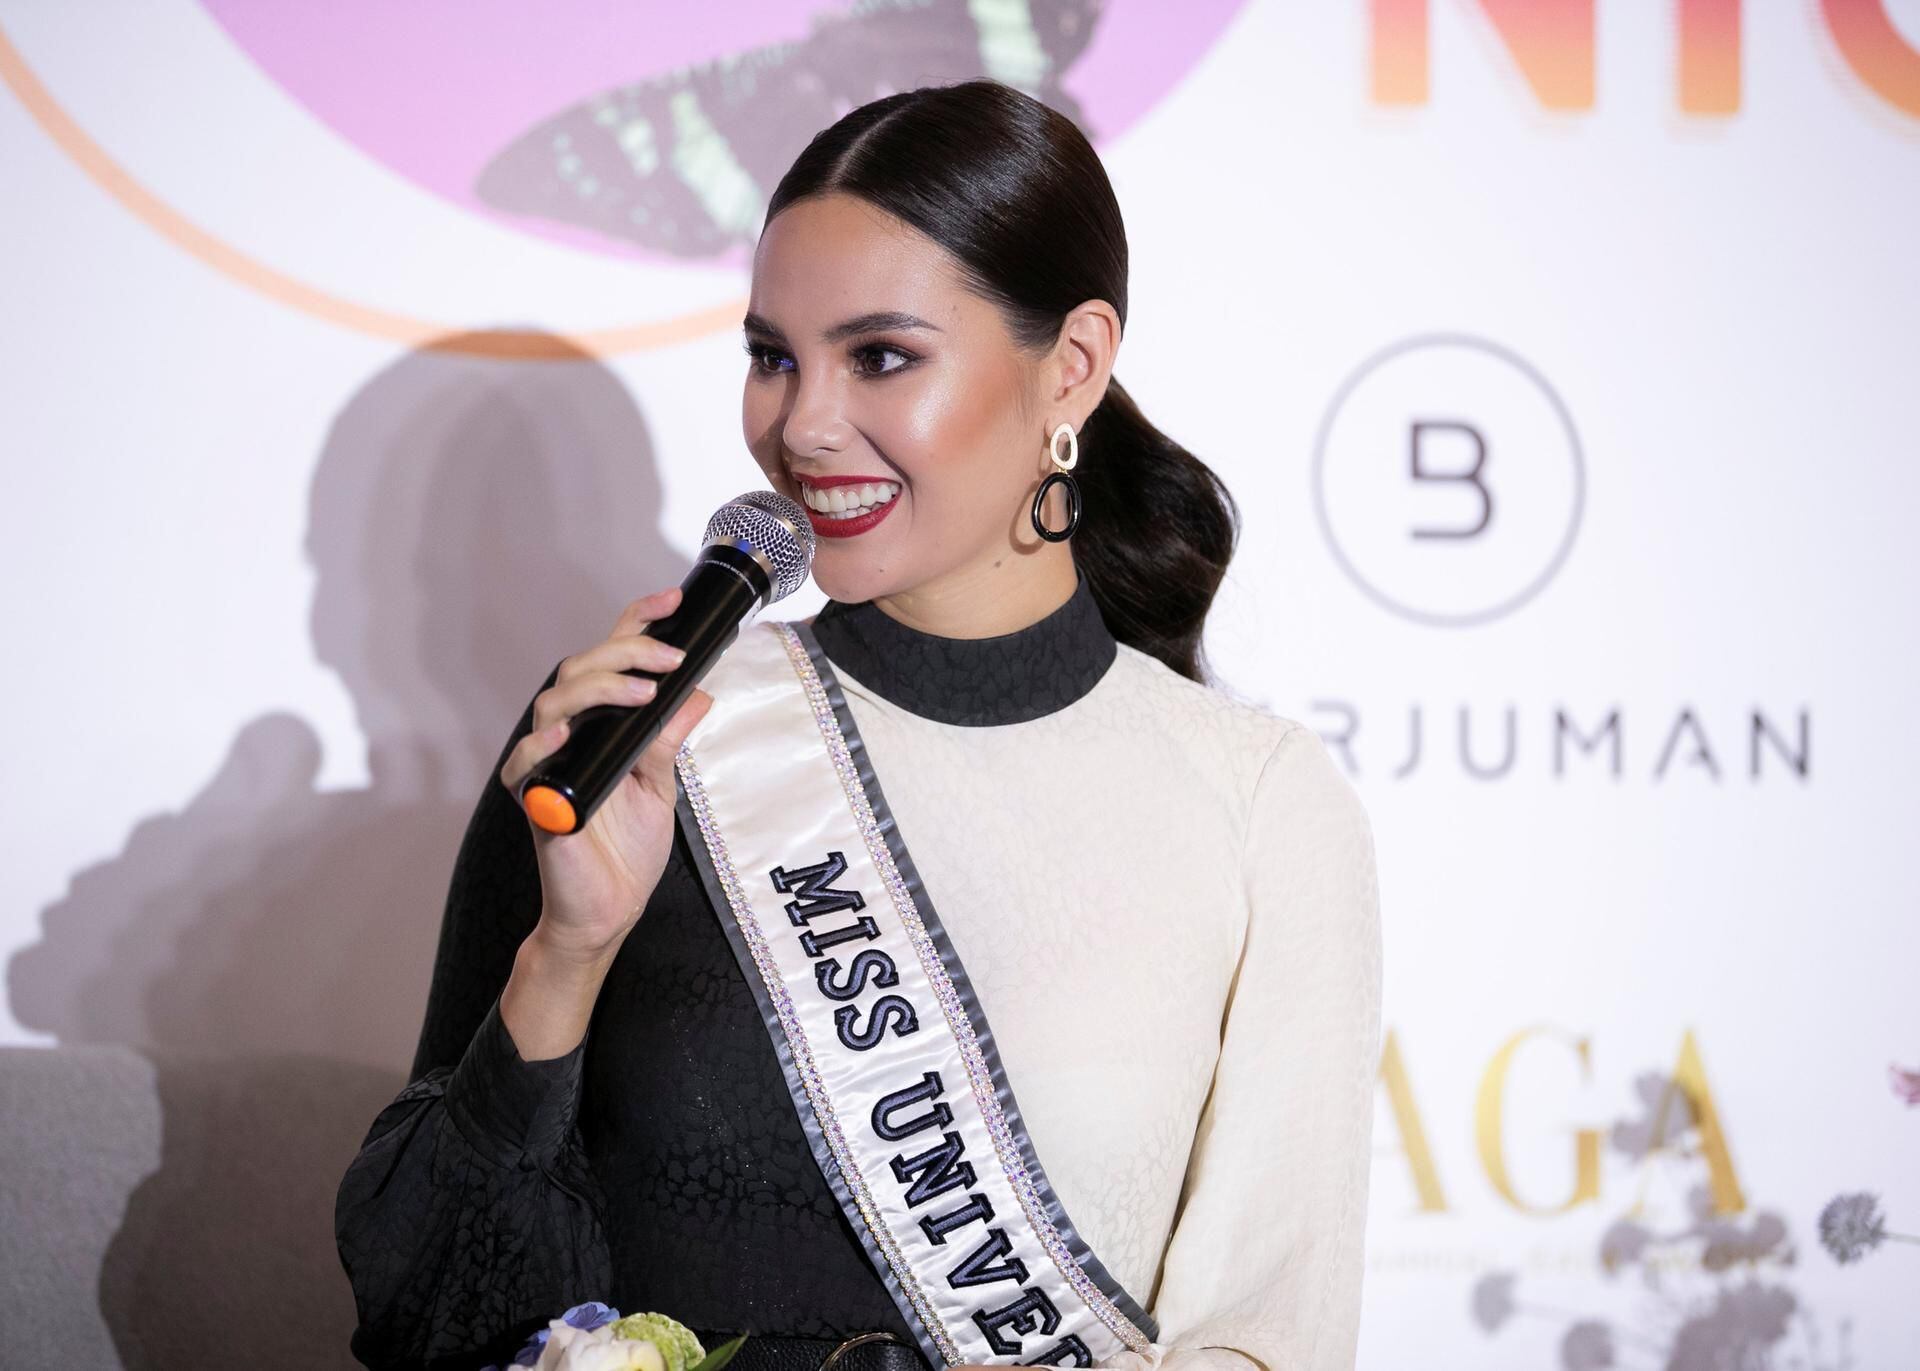 Miss Universe in Dubai Catriona Gray meets her UAE fans